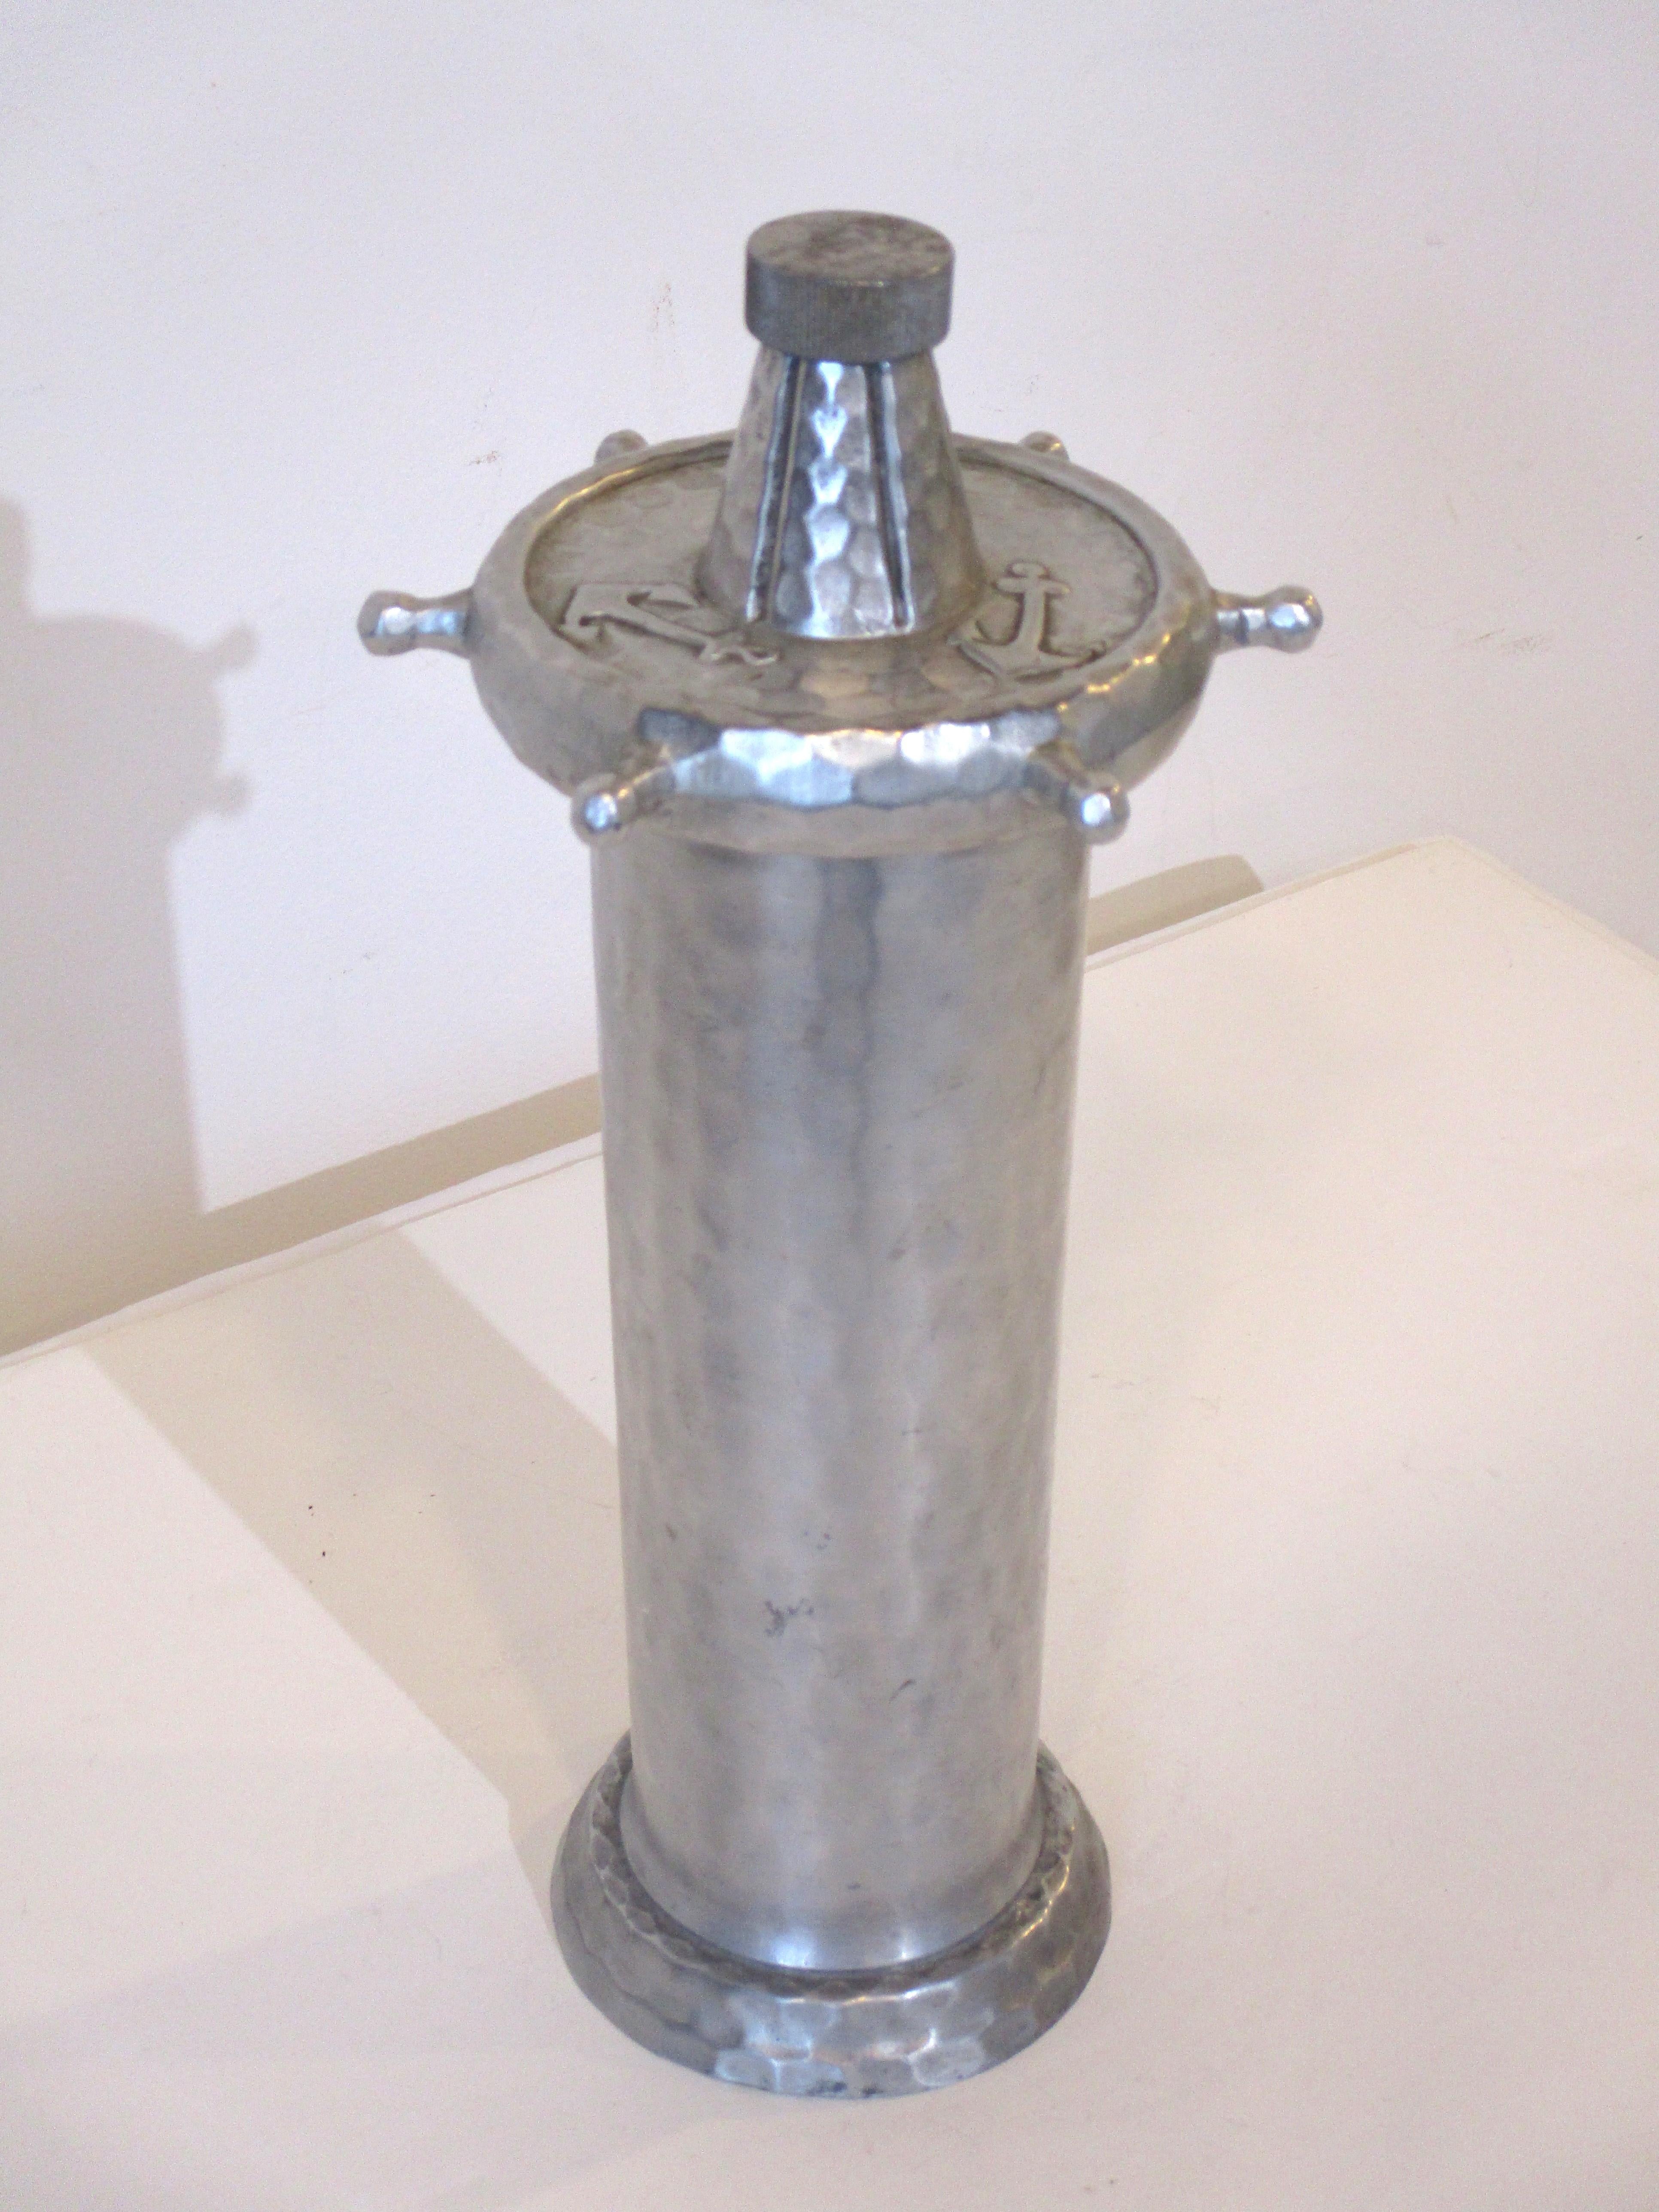 Nautical Hammered Aluminum Cocktail Shaker by Everlast 3